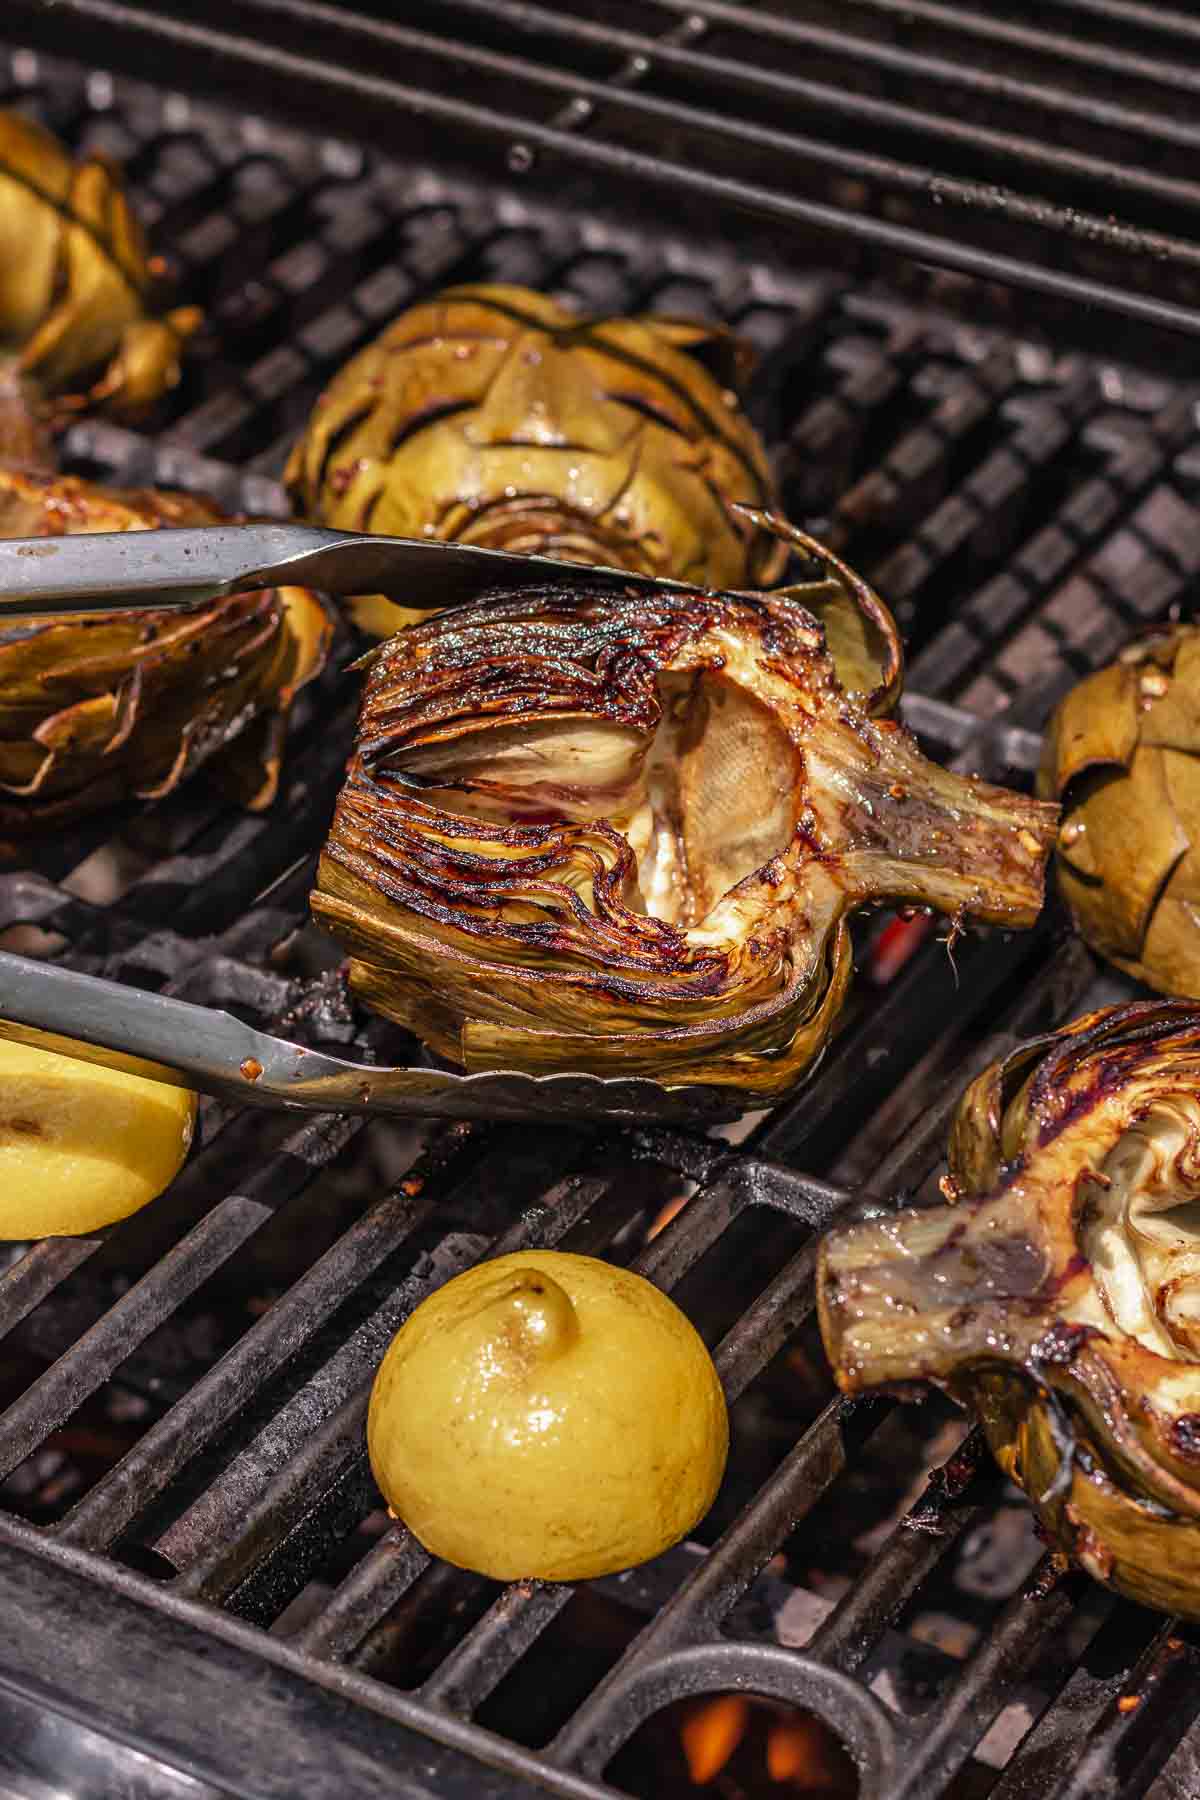 Tongs flip a charbroiled artichoke on the grill.